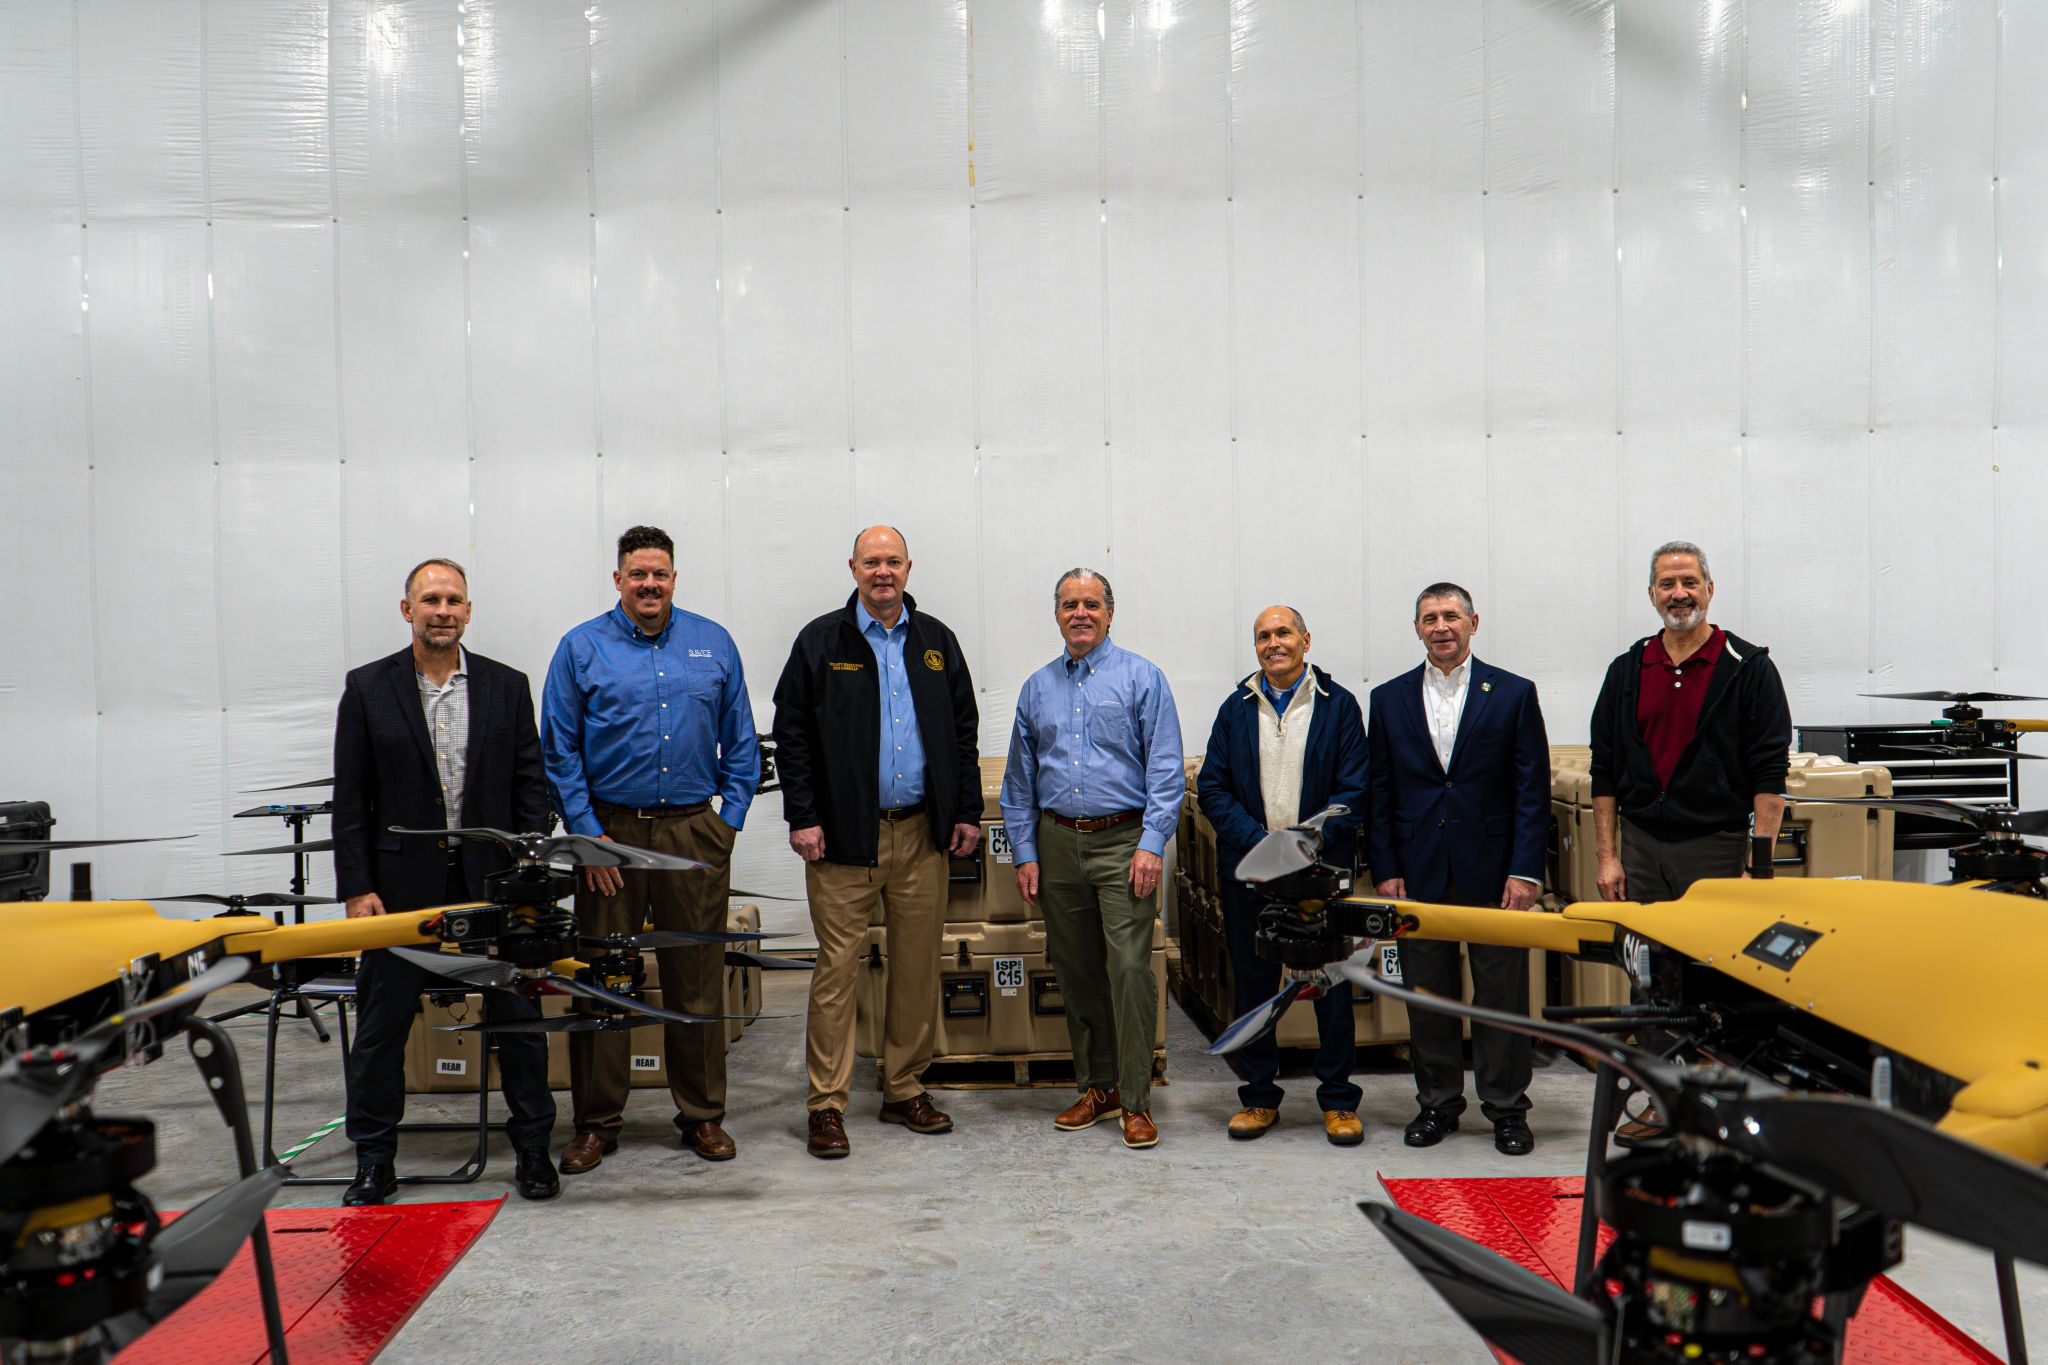 SURVICE hosted Harford County Executive Bob Cassilly and OED Deputy Director Larry Muzzelo at our Applied Technology Operation (ATO). Participants were invited for a briefing and a tour. Mark Butkiewicz, (VP) Applied Engineering & ATO Manager, gave the group a SURVICE Engineering overview, discussed ATO operations, and briefed on our ongoing drone programs!